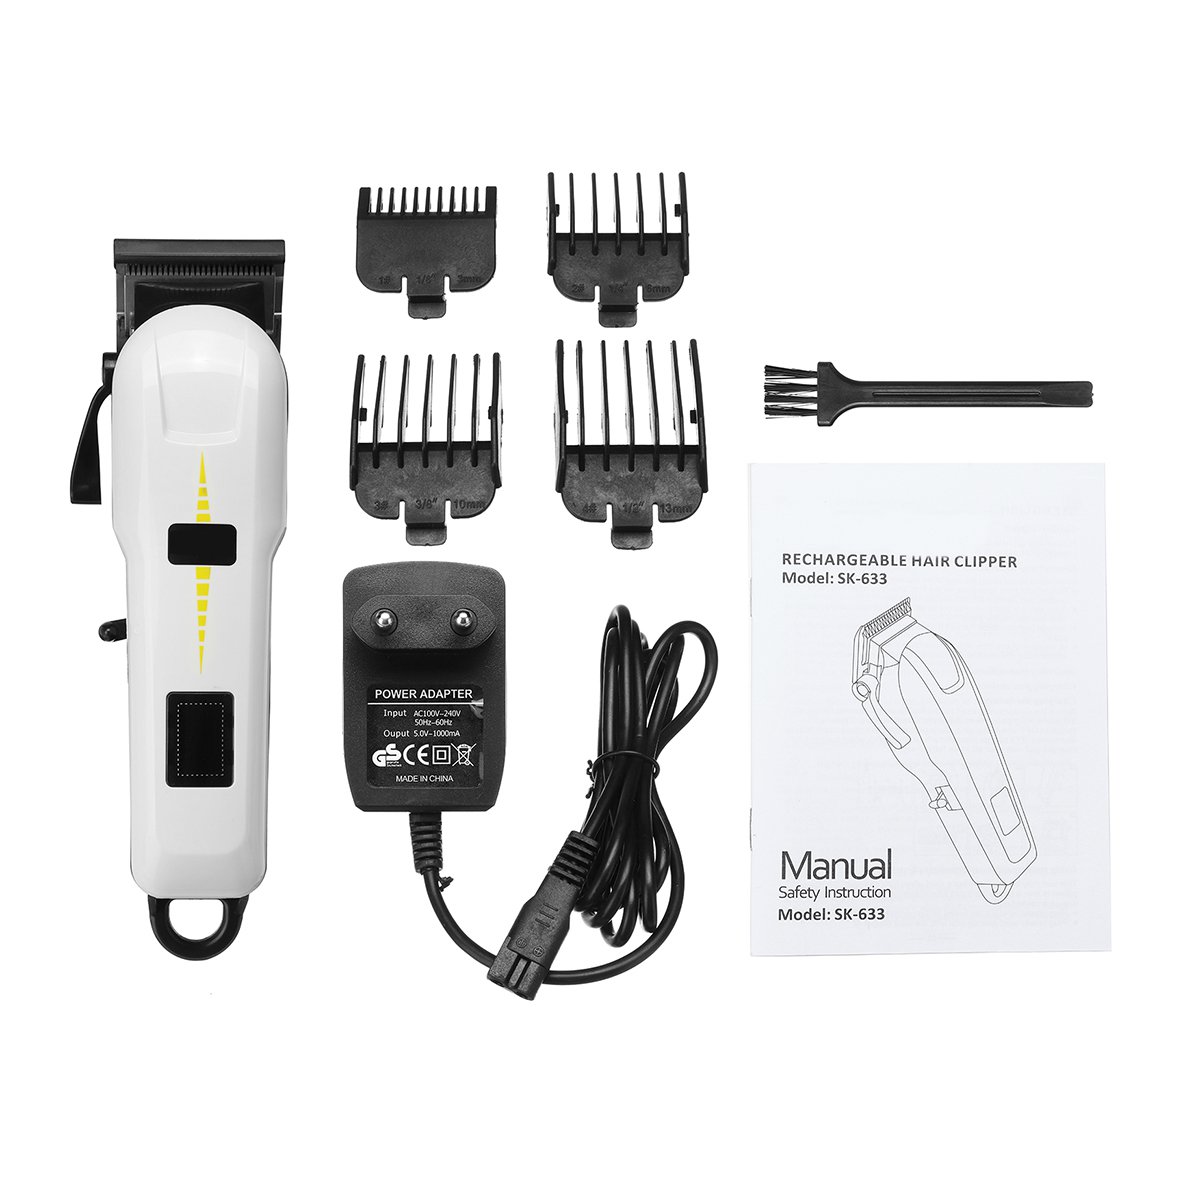 3W-Cordless-Electric-Shaver-Hair-Clipper-Rechargeable-Trimmer-Haircut-Machine-LED-Display-1409954